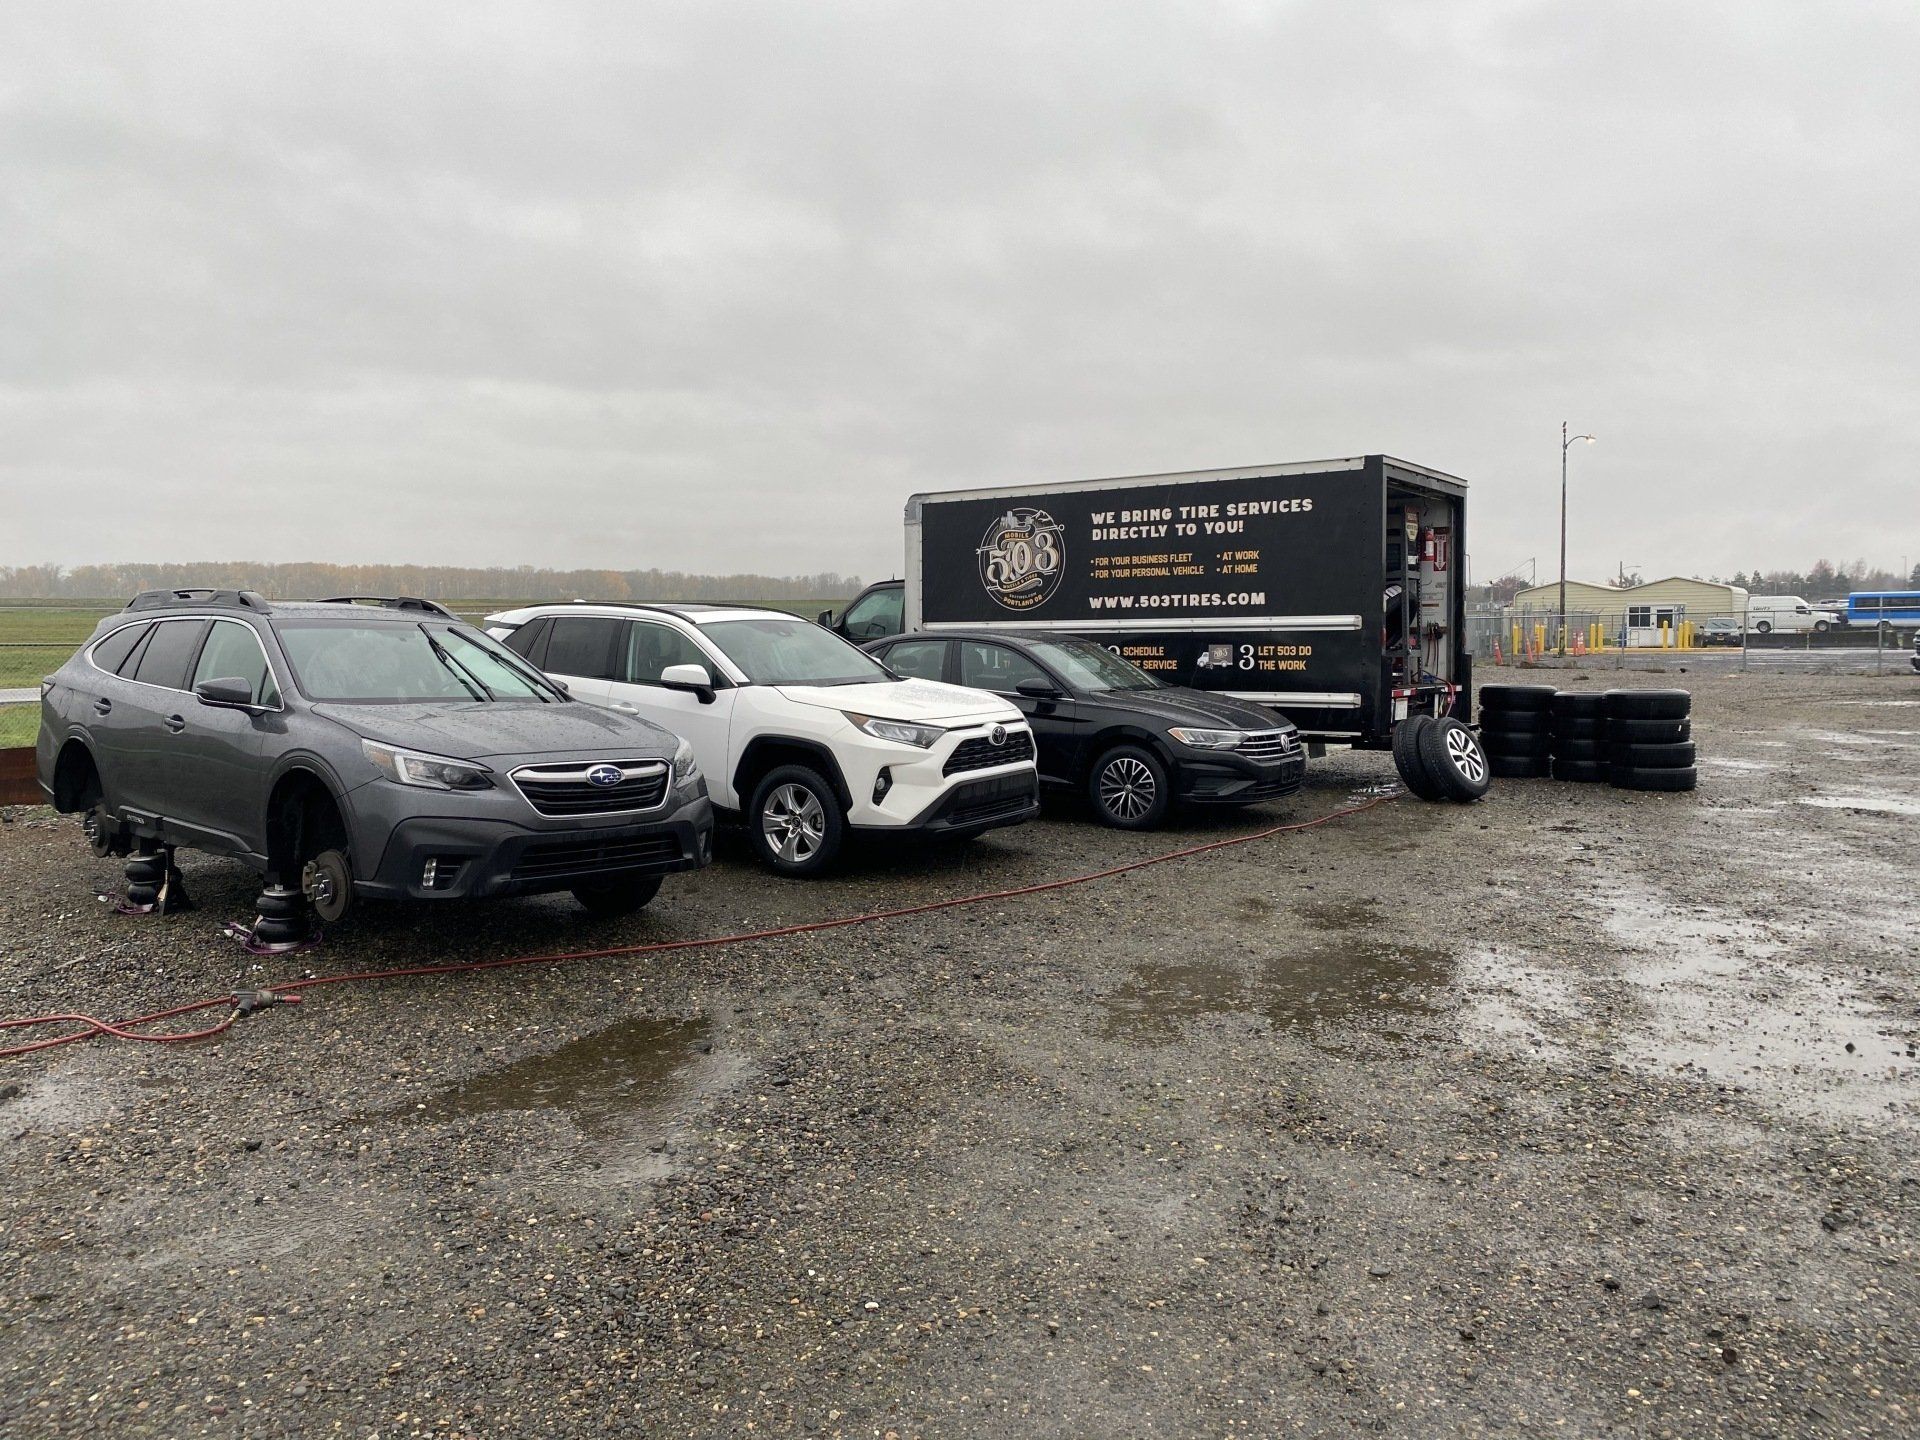 Picture of a three different vehicles and the 503 Truck parked.